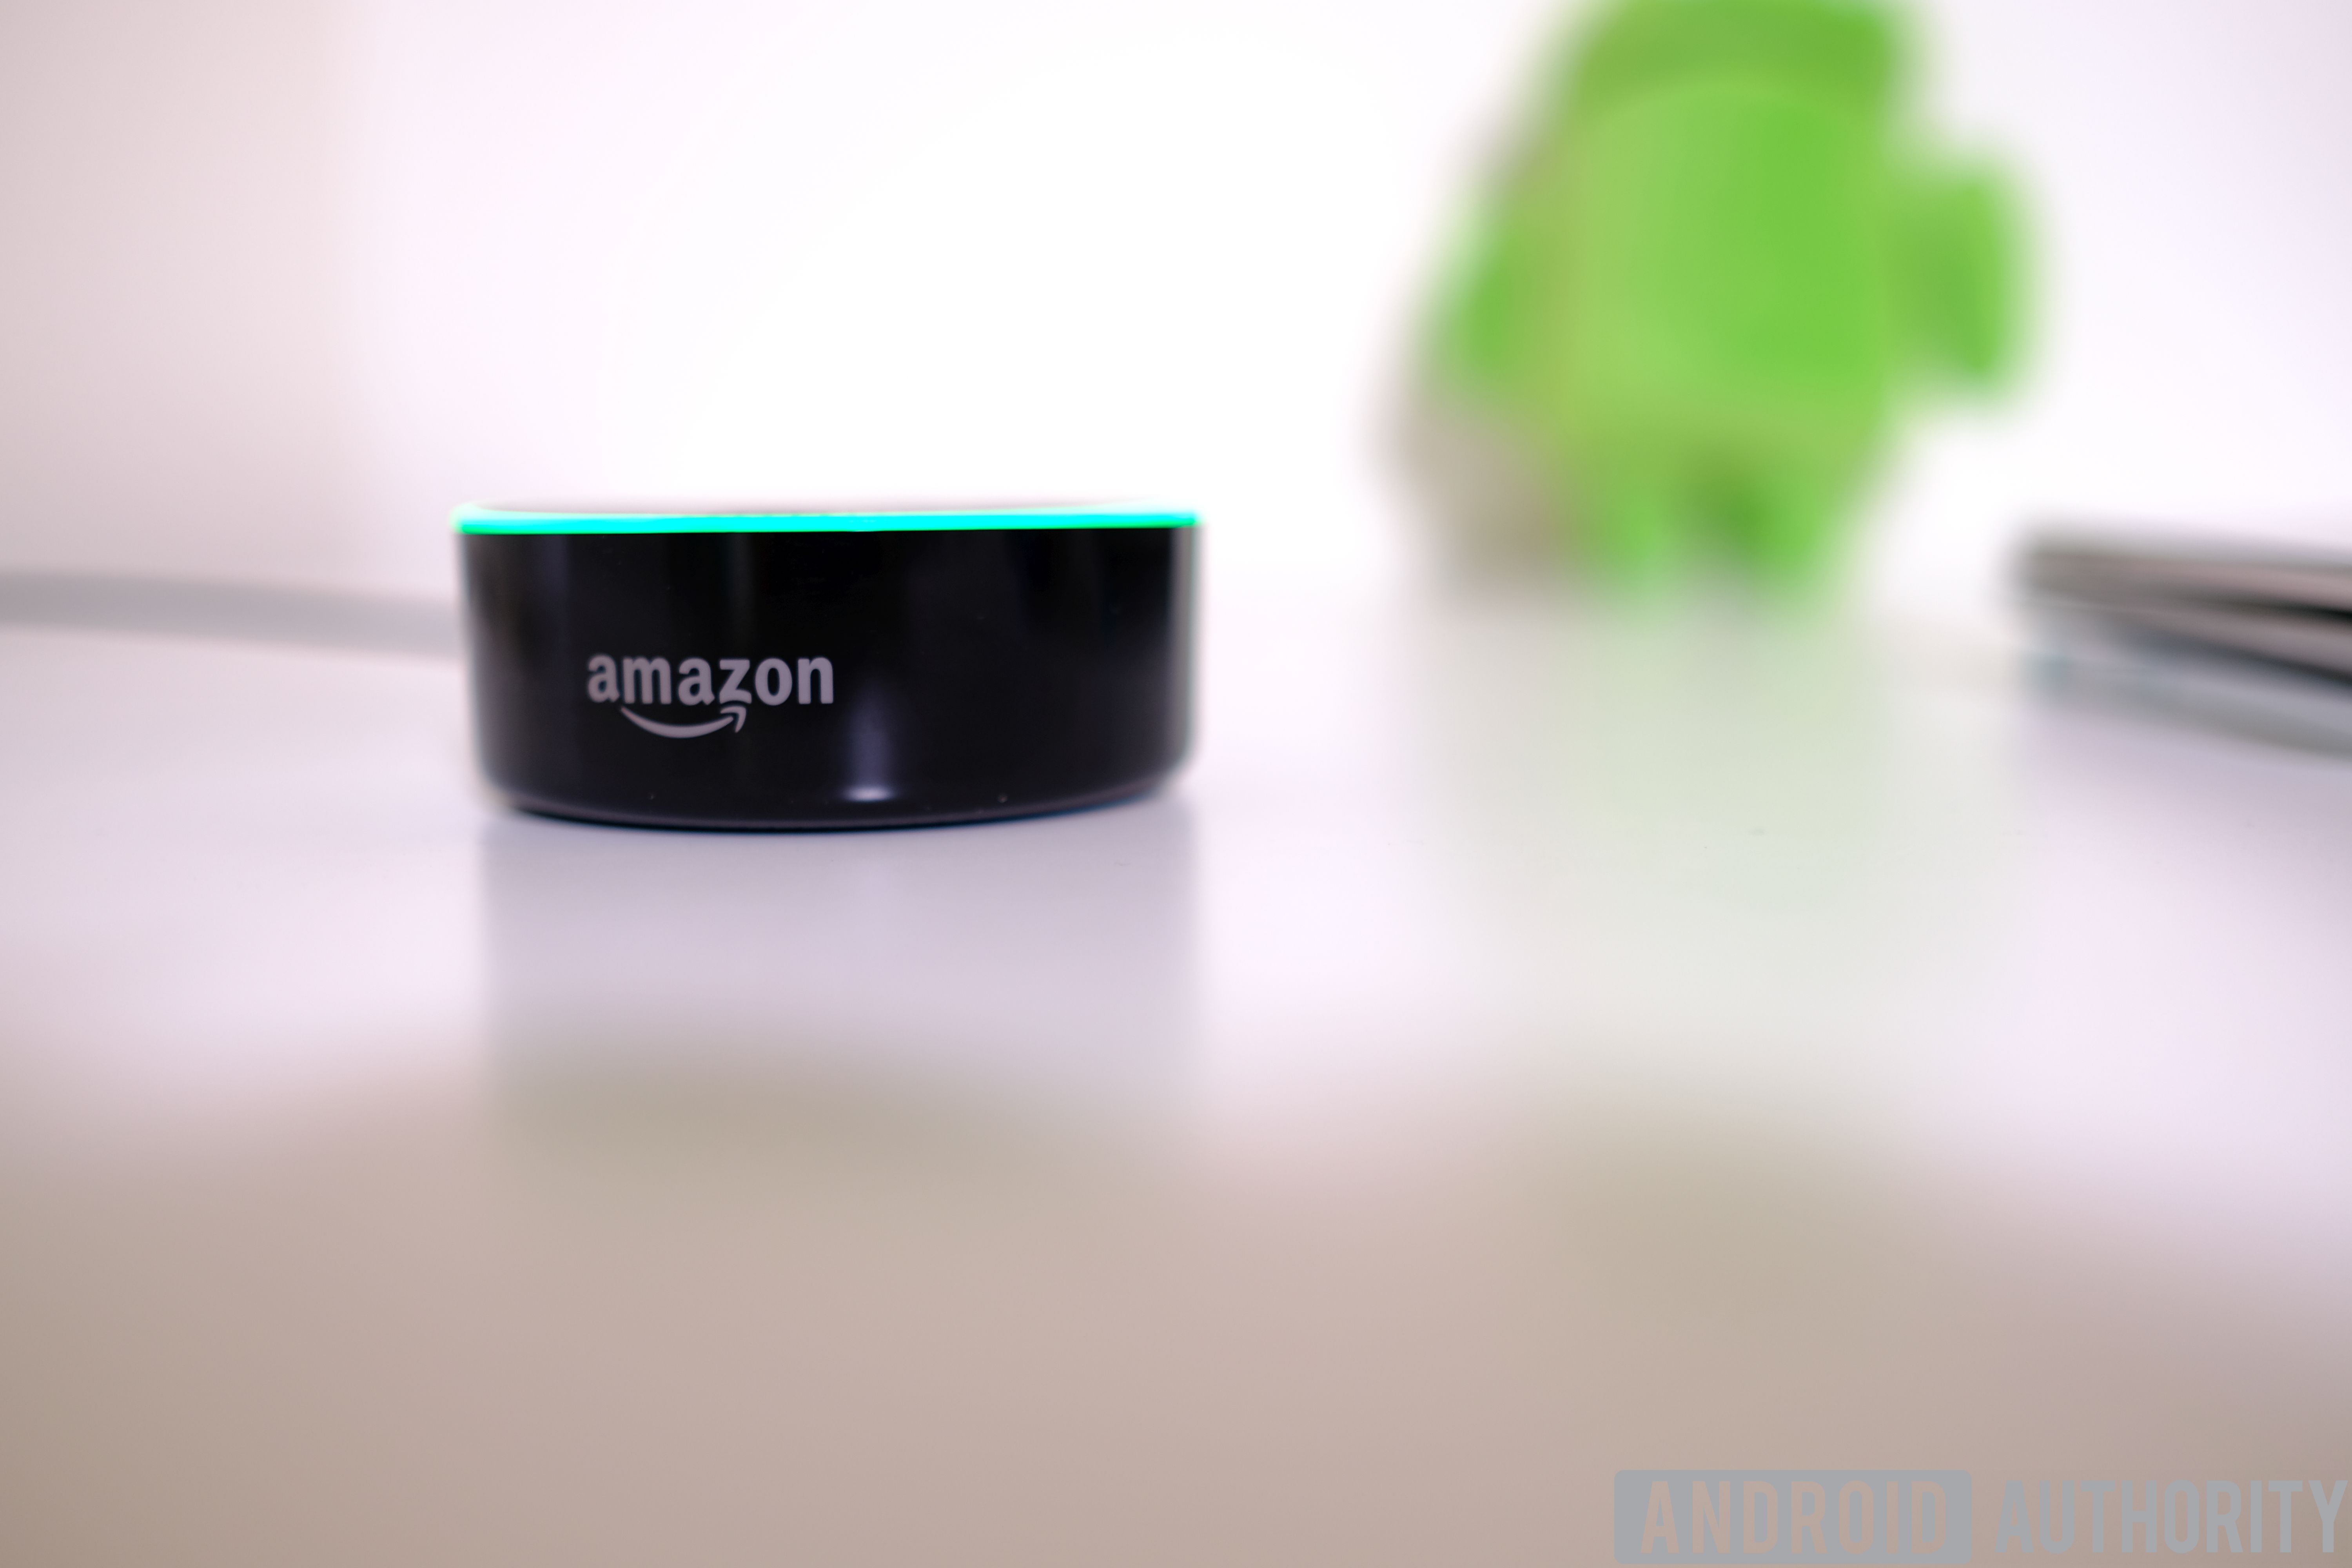 Amazon Echo Dot from the side focused